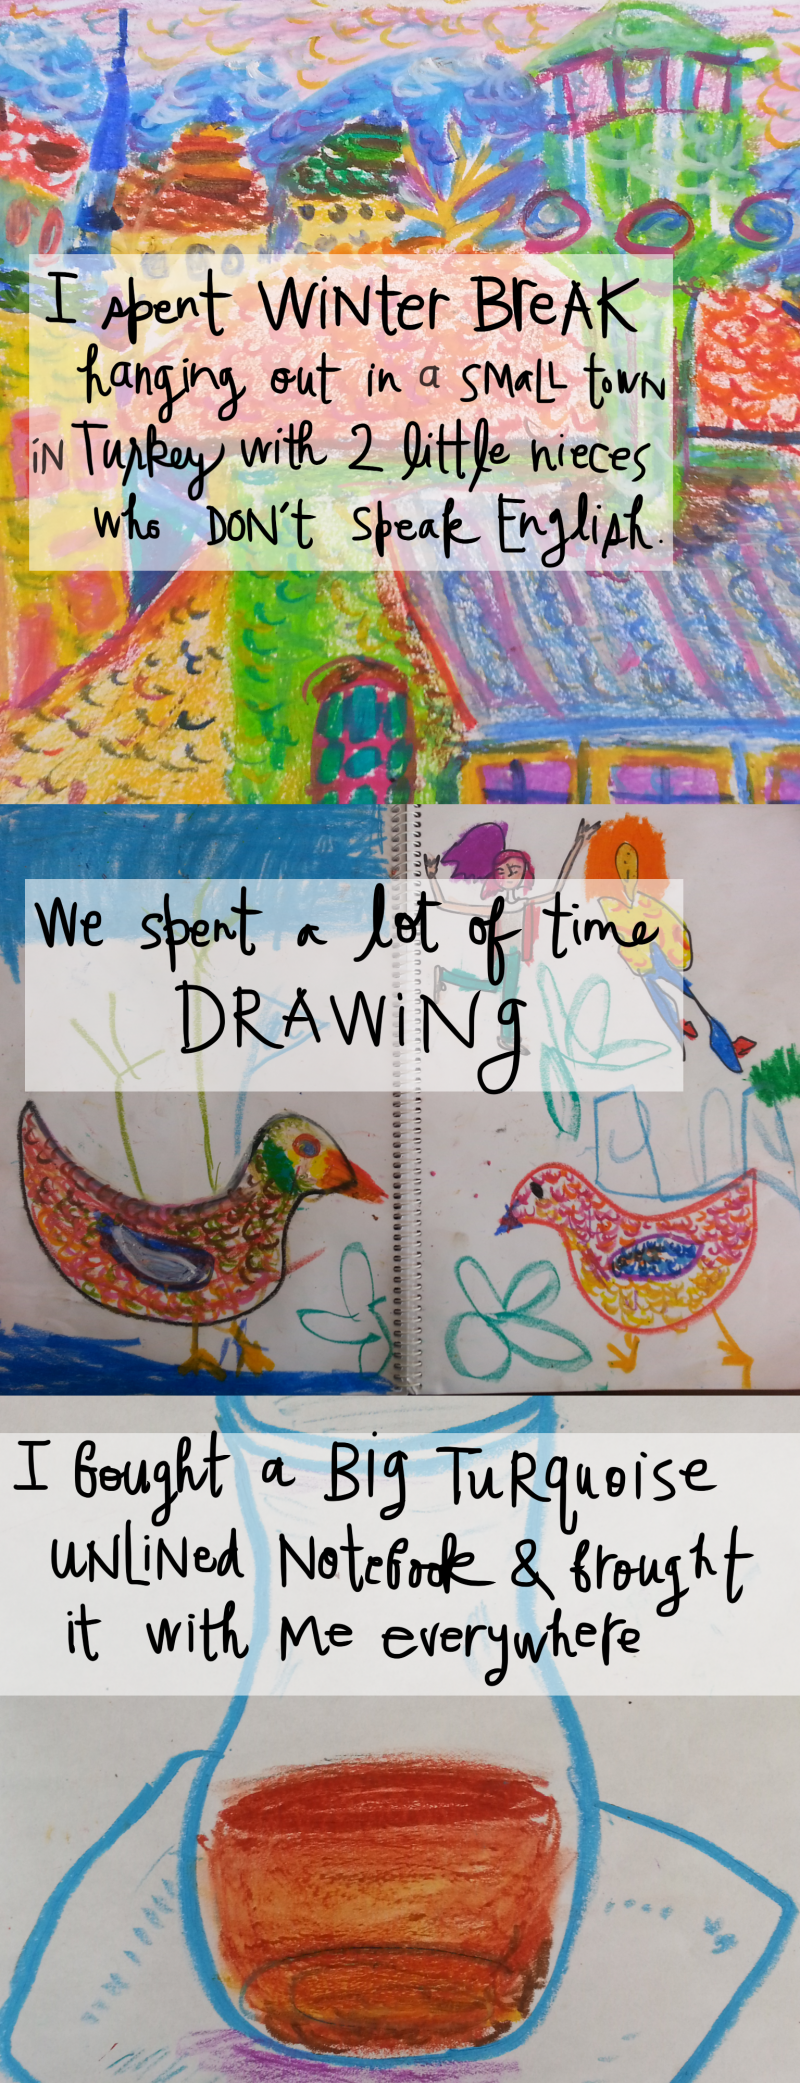 Drawing with kids 1 - by Margaret Hagan